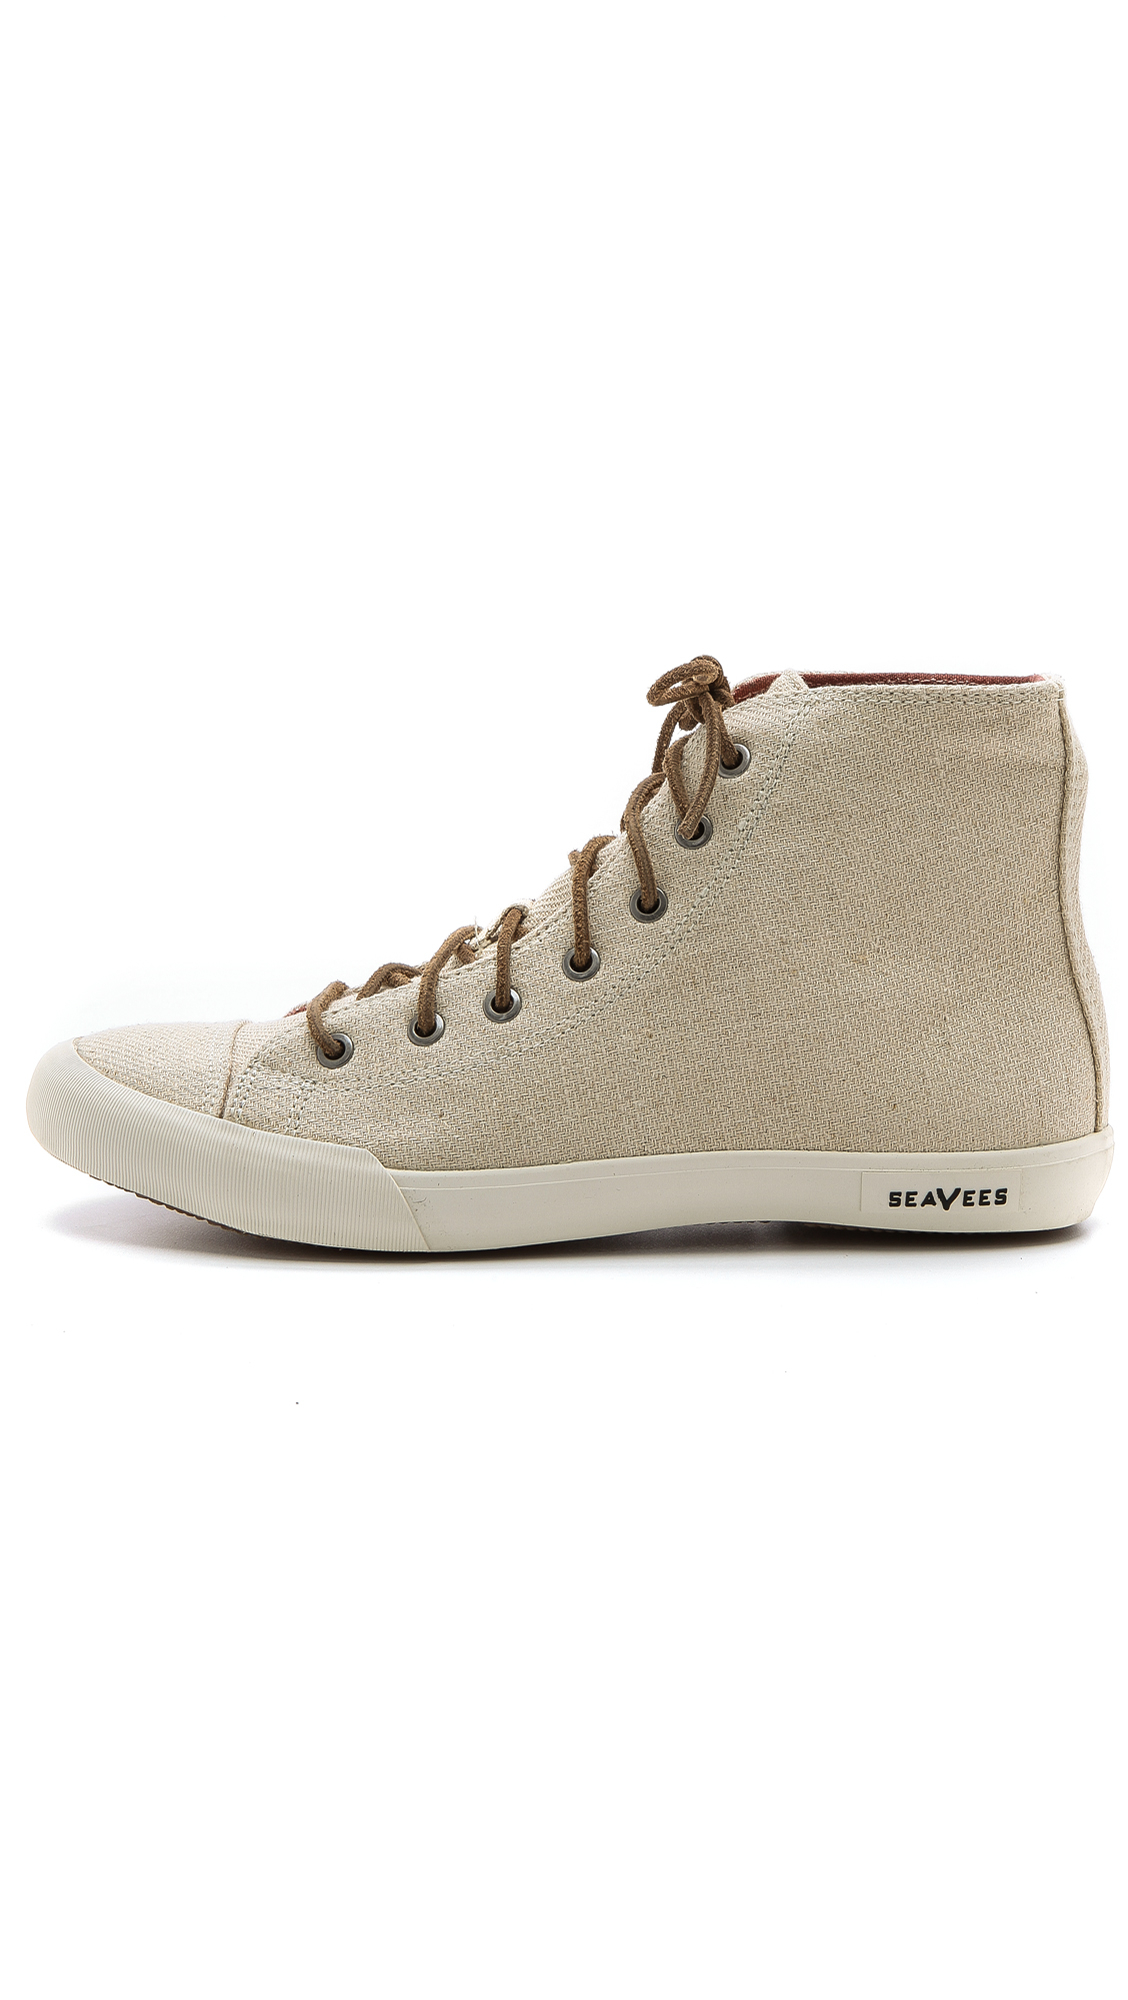 Seavees 08/61 Army Issue High Top 